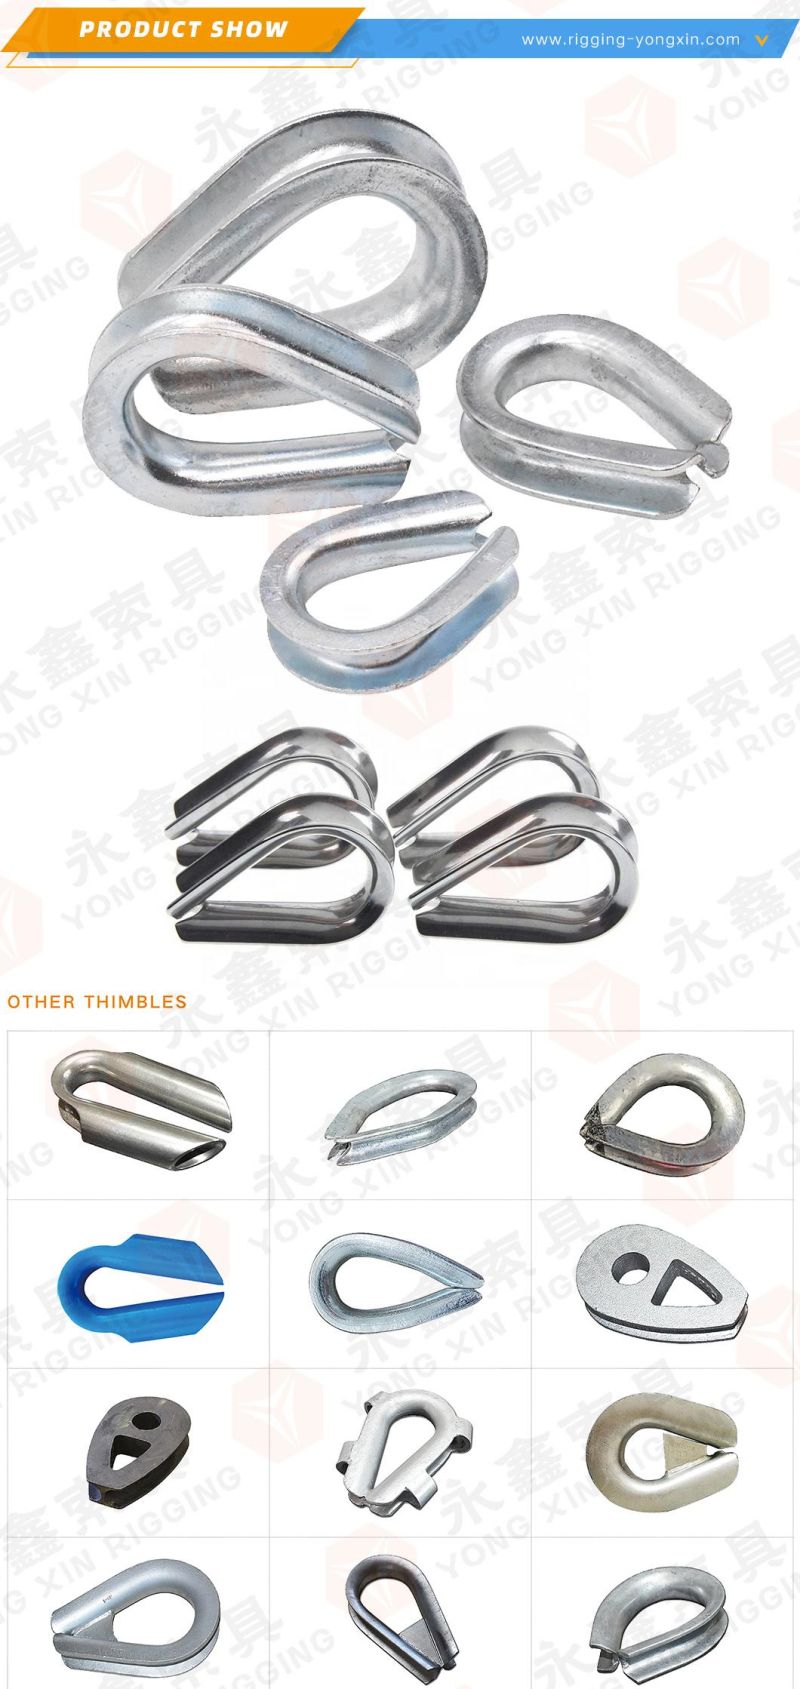 G412 Solid Wire Rope Thimble